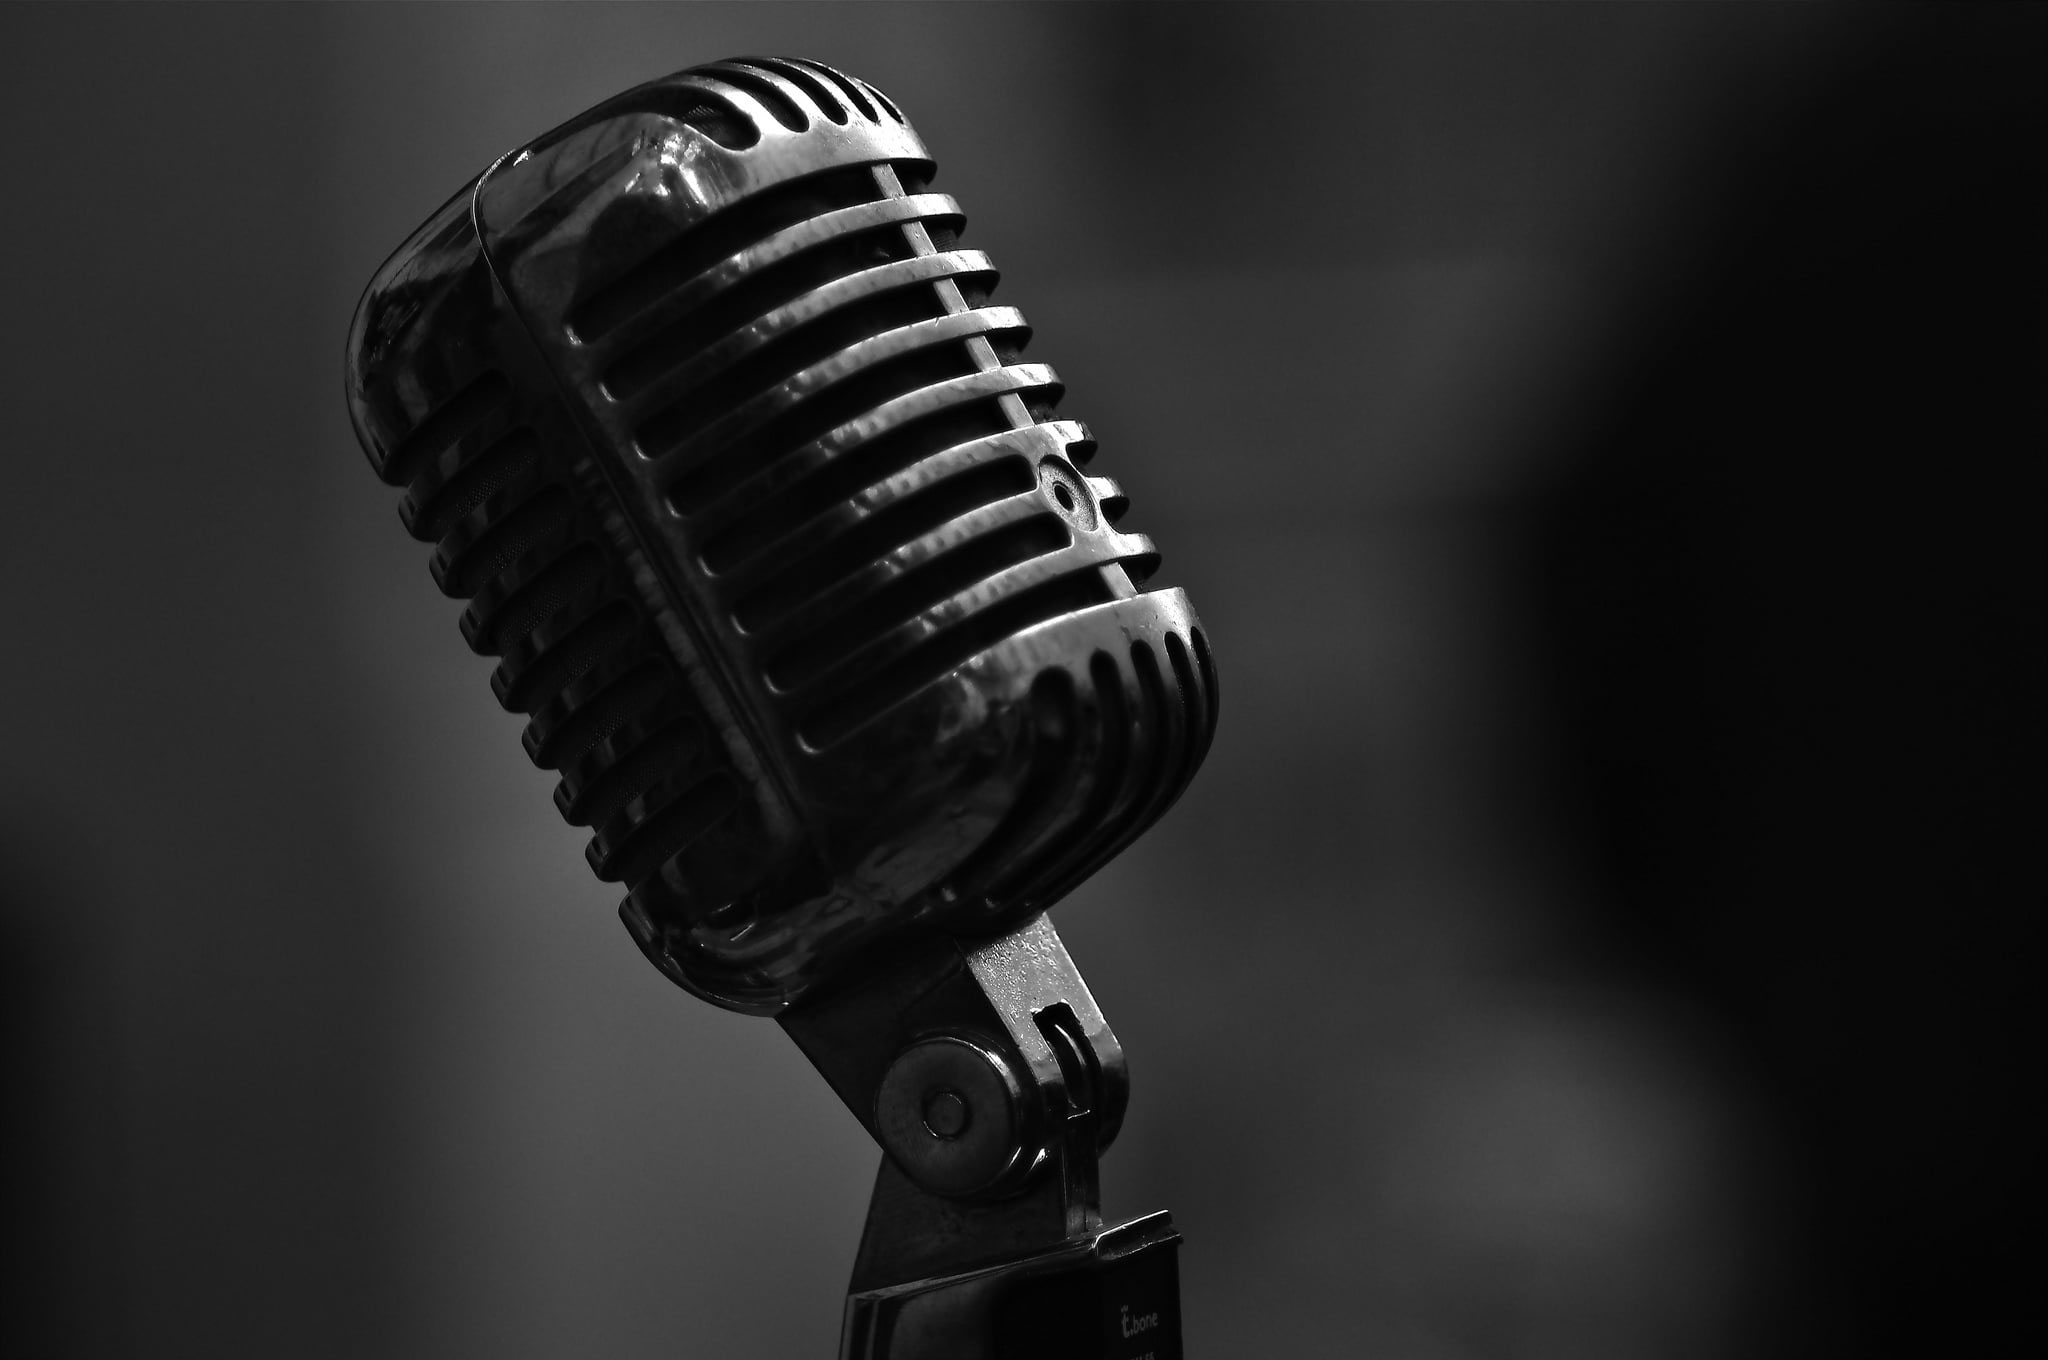 Wallpaper Gray Condenser Microphone, Bw, Metal, Close Up